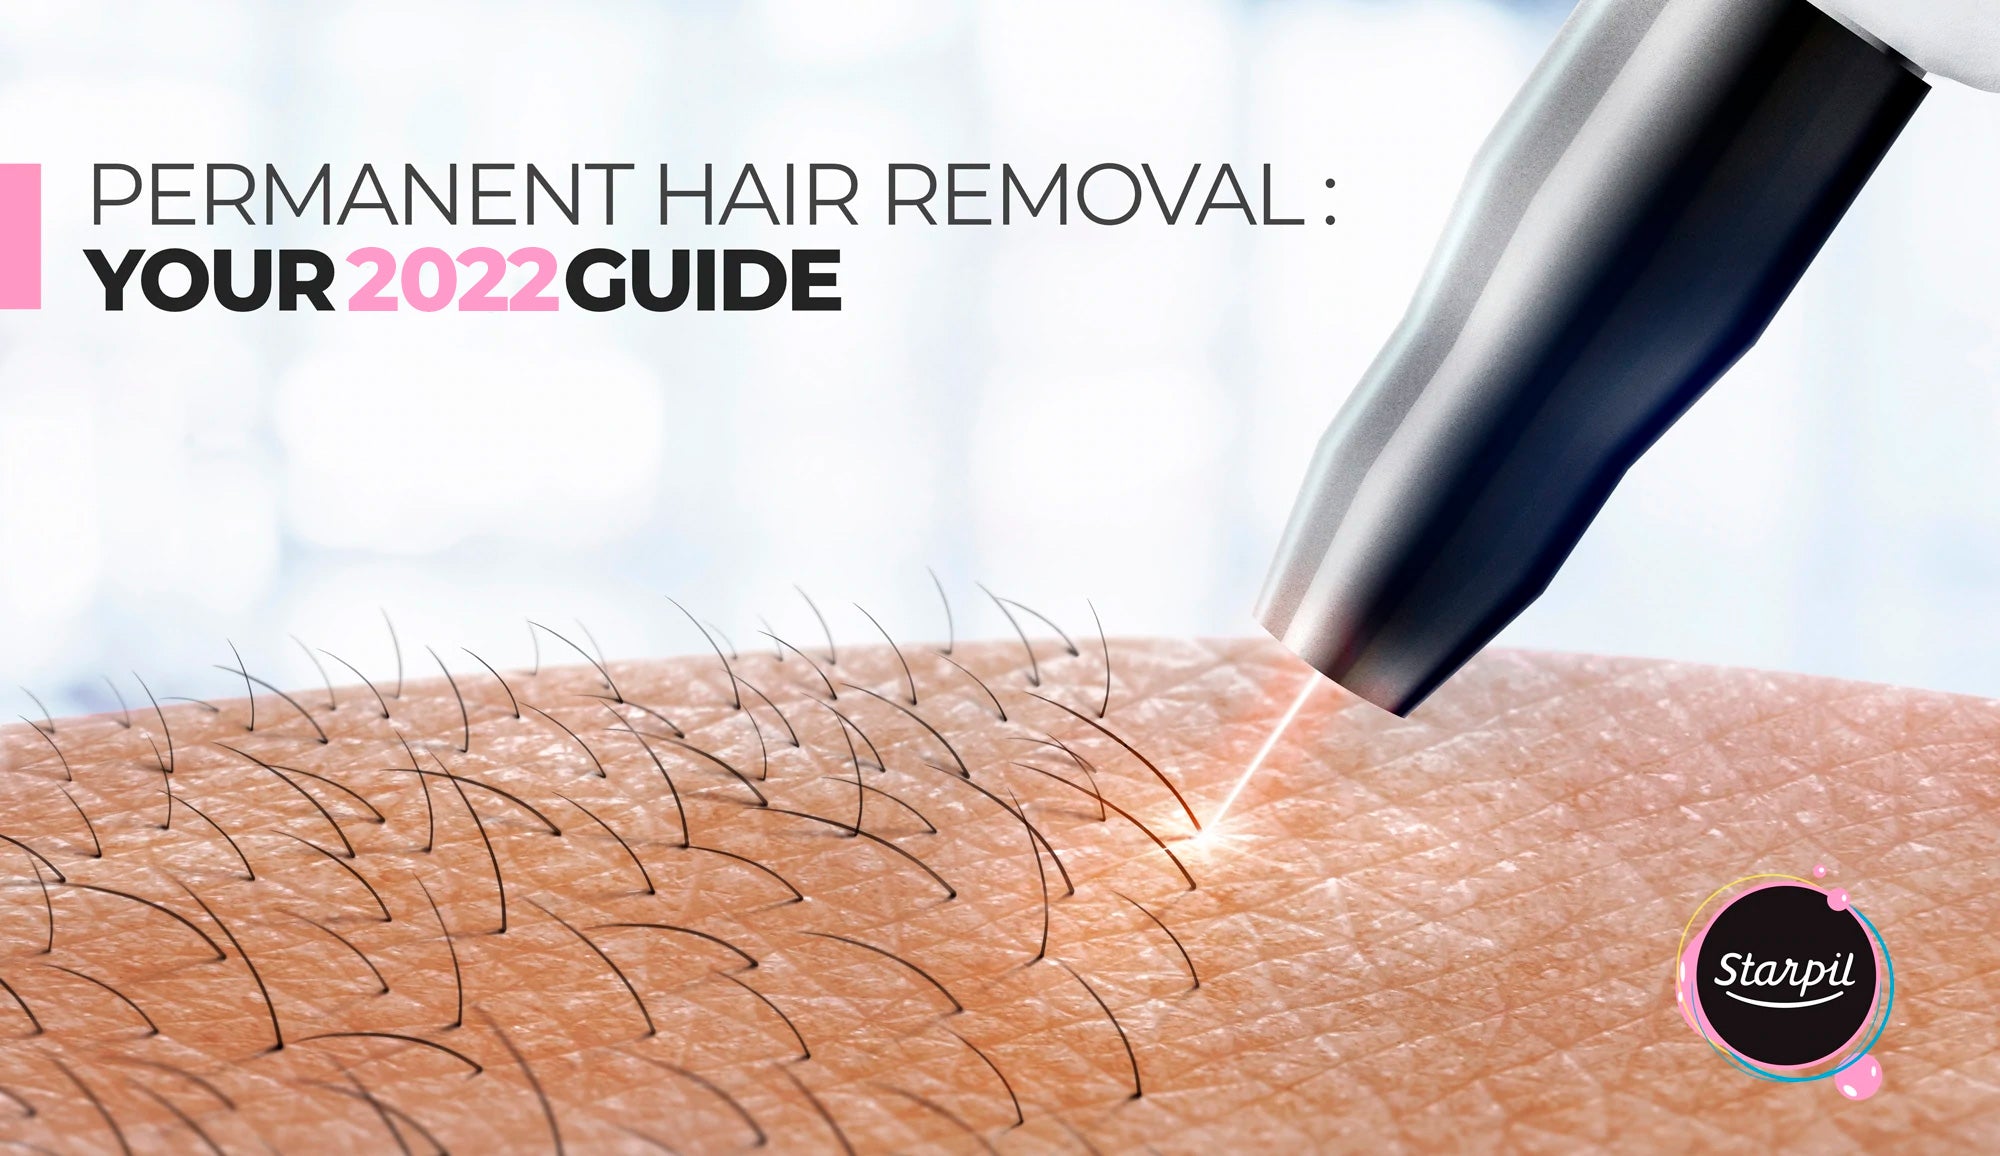 Permanent Hair Removal: Your 2022 Guide